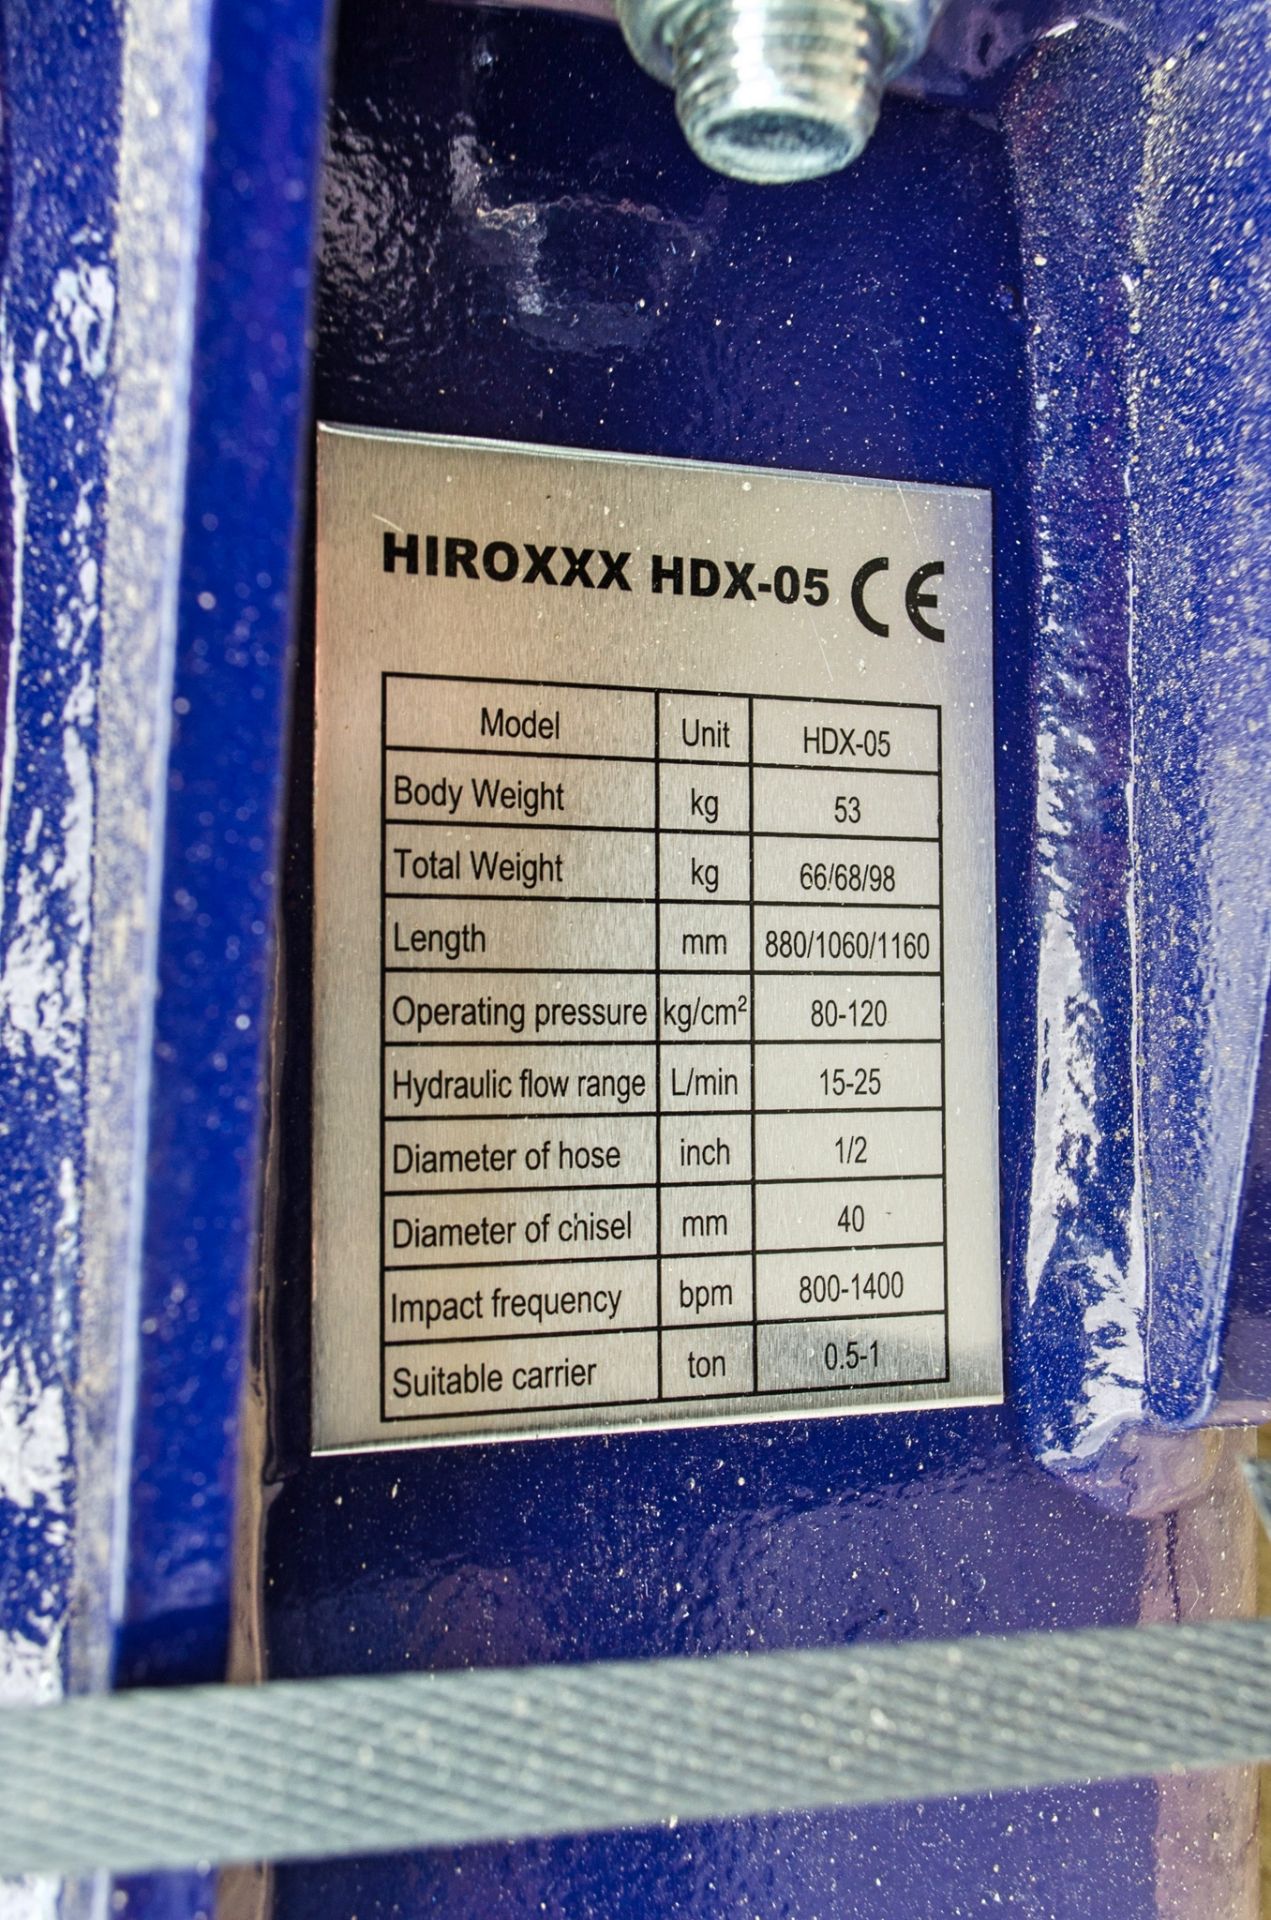 Hirox HD-X05 hydraulic breaker to suit 0.5 to 1.5 tonne excavator ** New & Unused ** - Image 4 of 4